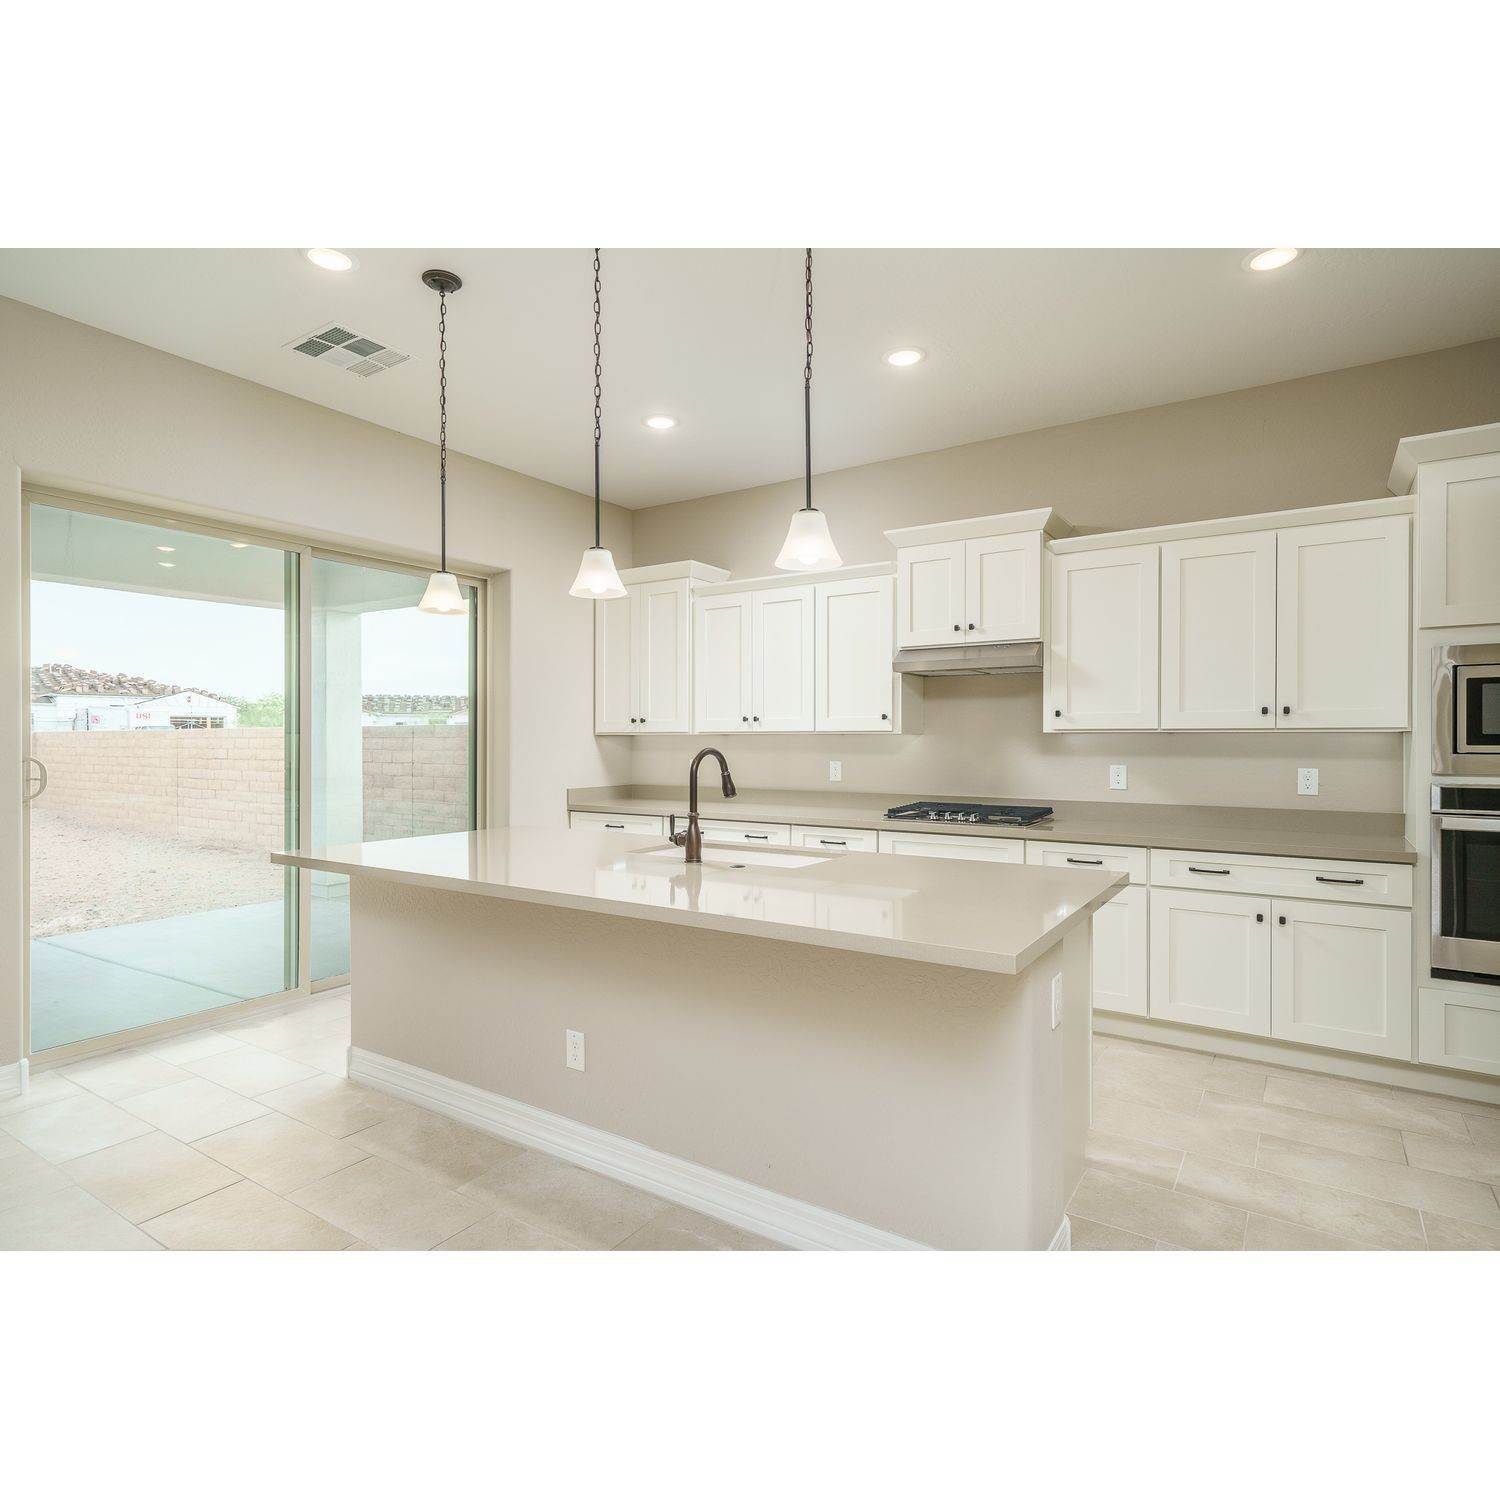 28. Single Family for Sale at Harmony At Montecito In Estrella 18624 W Cathedral Rock Drive, Goodyear, AZ 85338